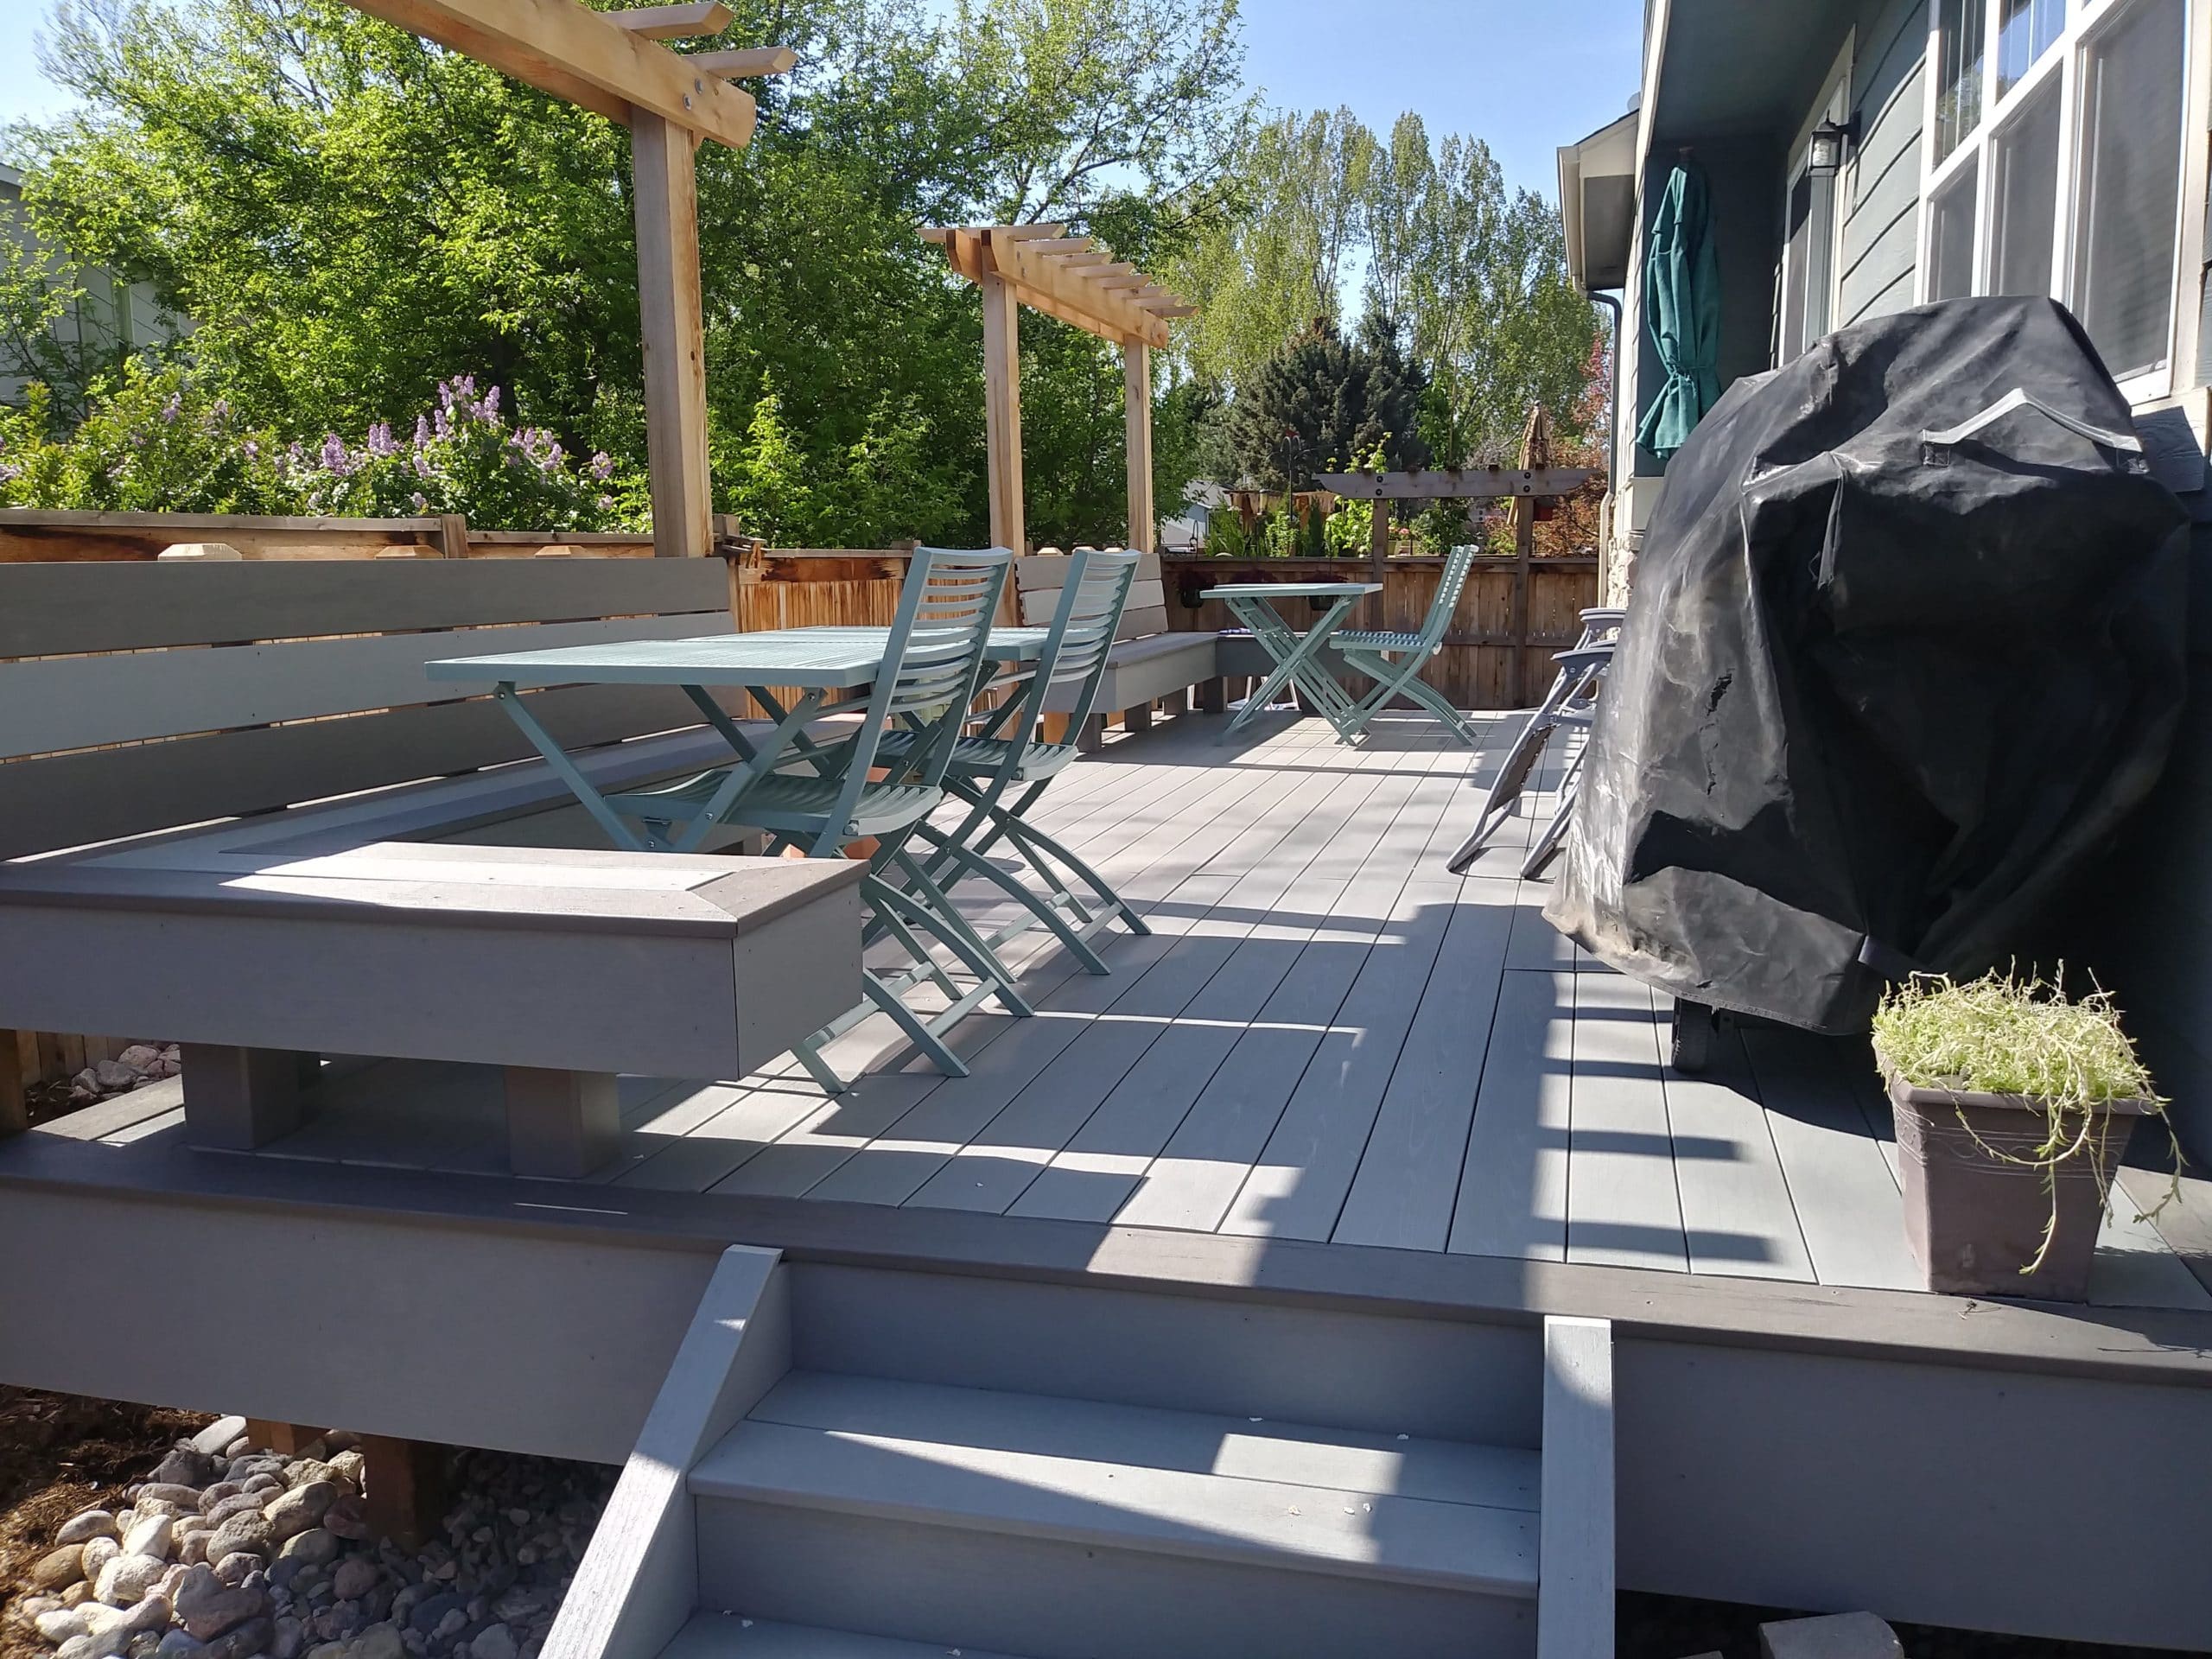 Composite deck with built in bench seats and small pergolas over top.